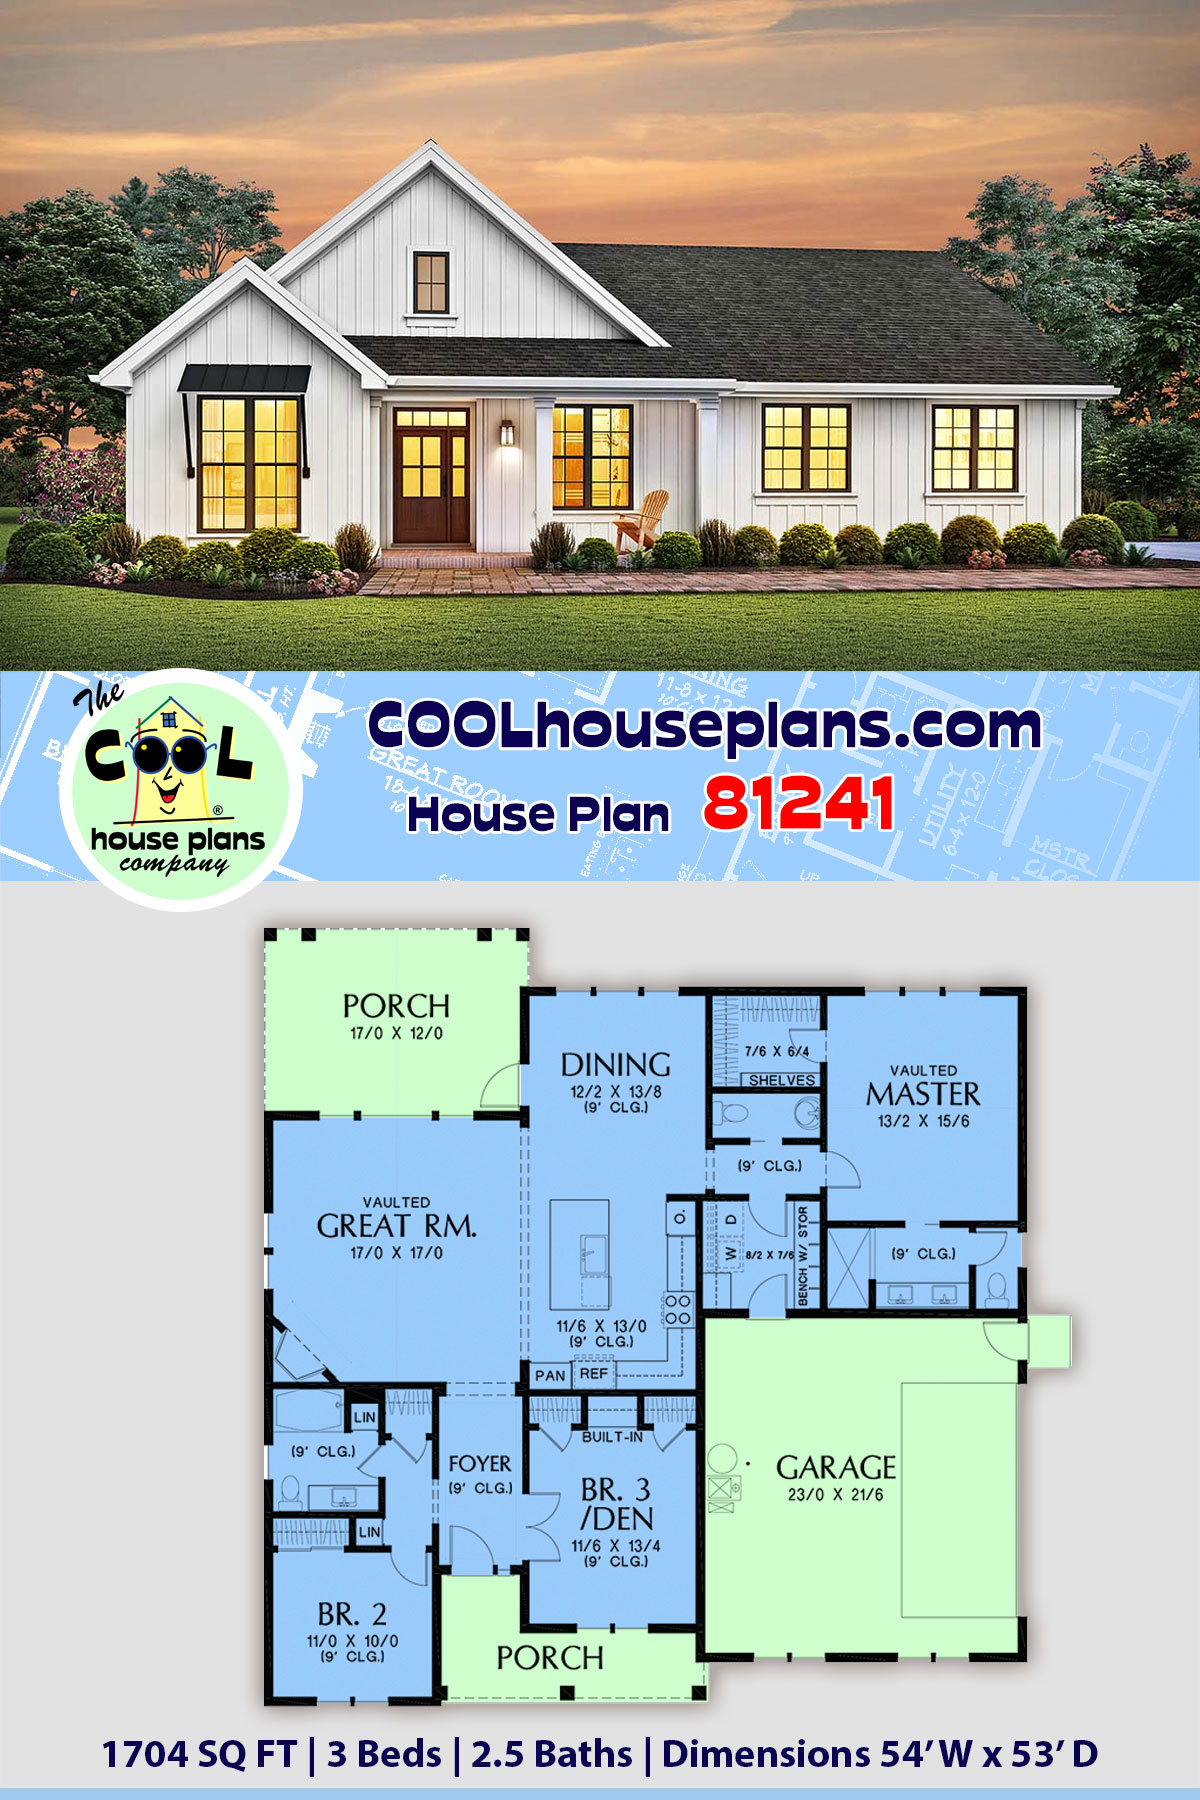 Cottage, Country, Ranch, Traditional House Plan 81241 with 3 Beds, 3 Baths, 2 Car Garage